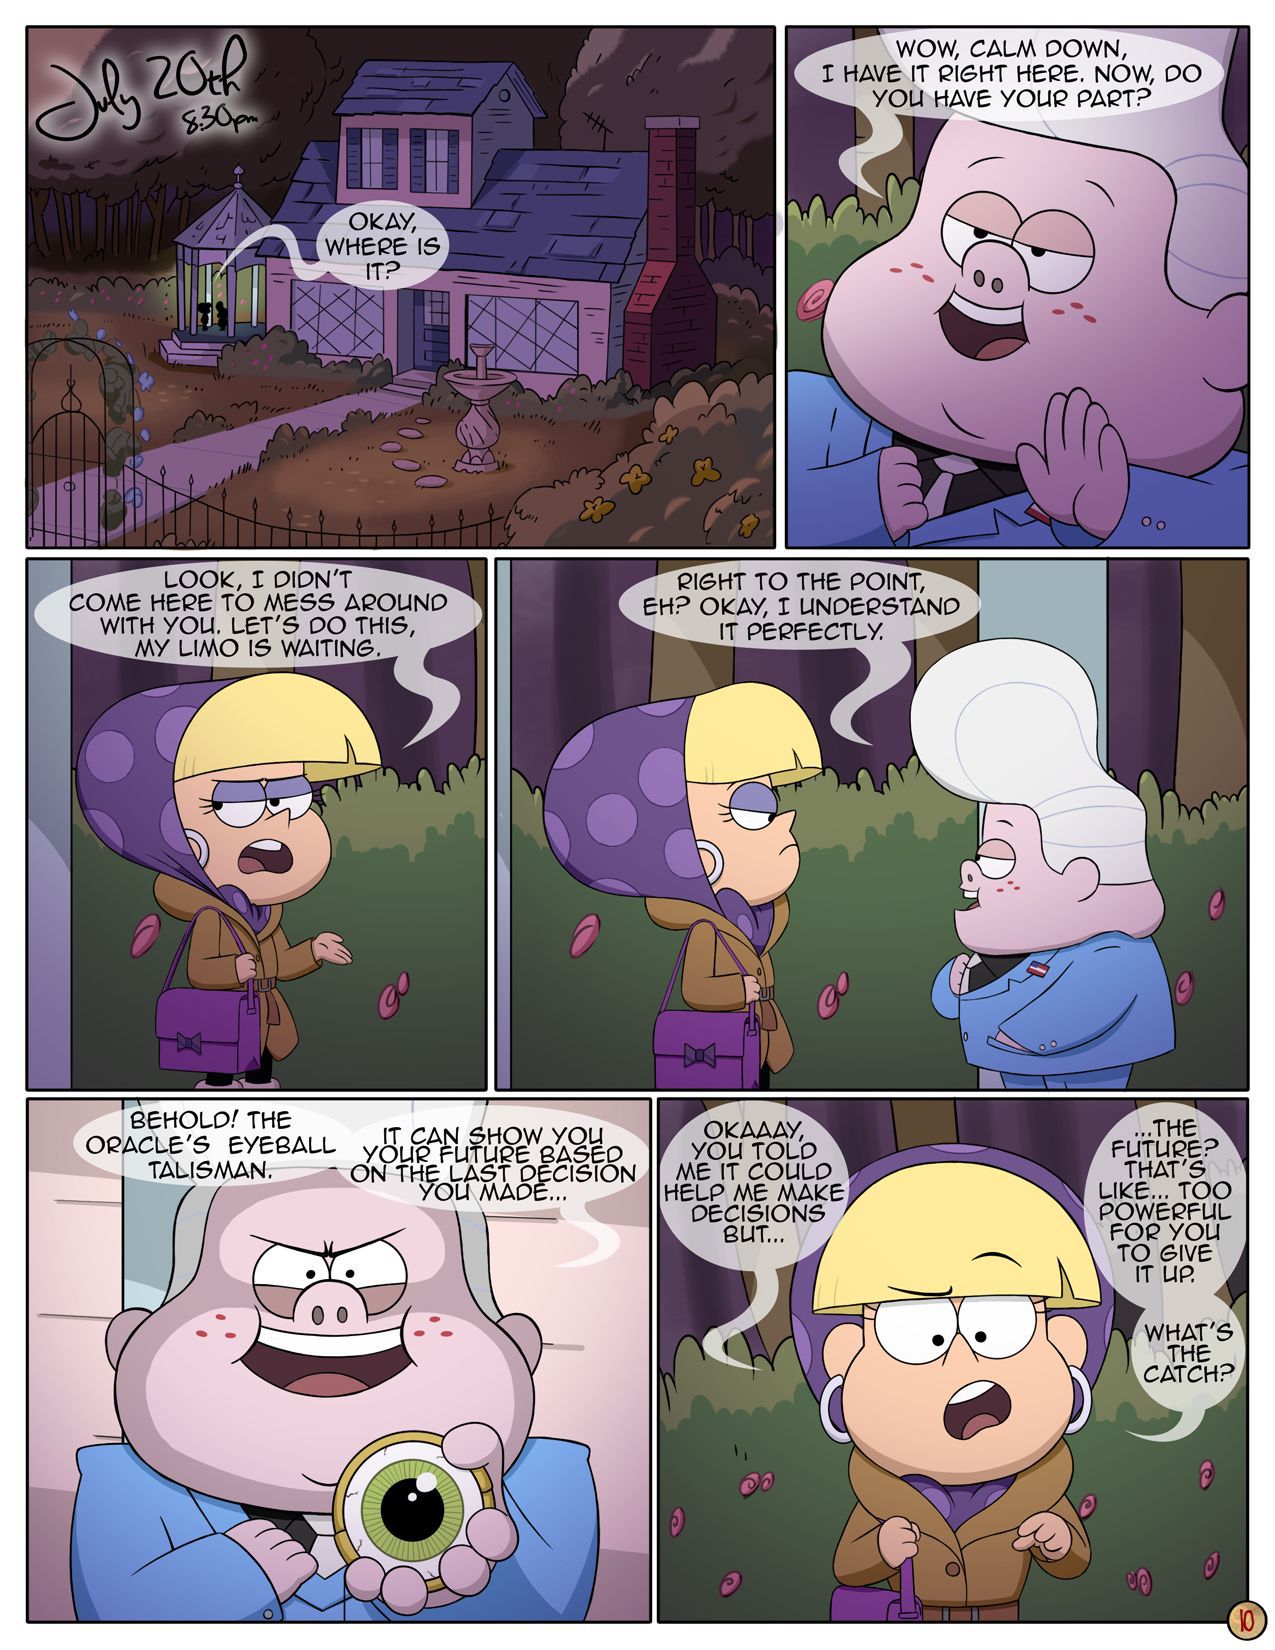 [Area] Next Summer (Gravity Falls) [Ongoing] 11